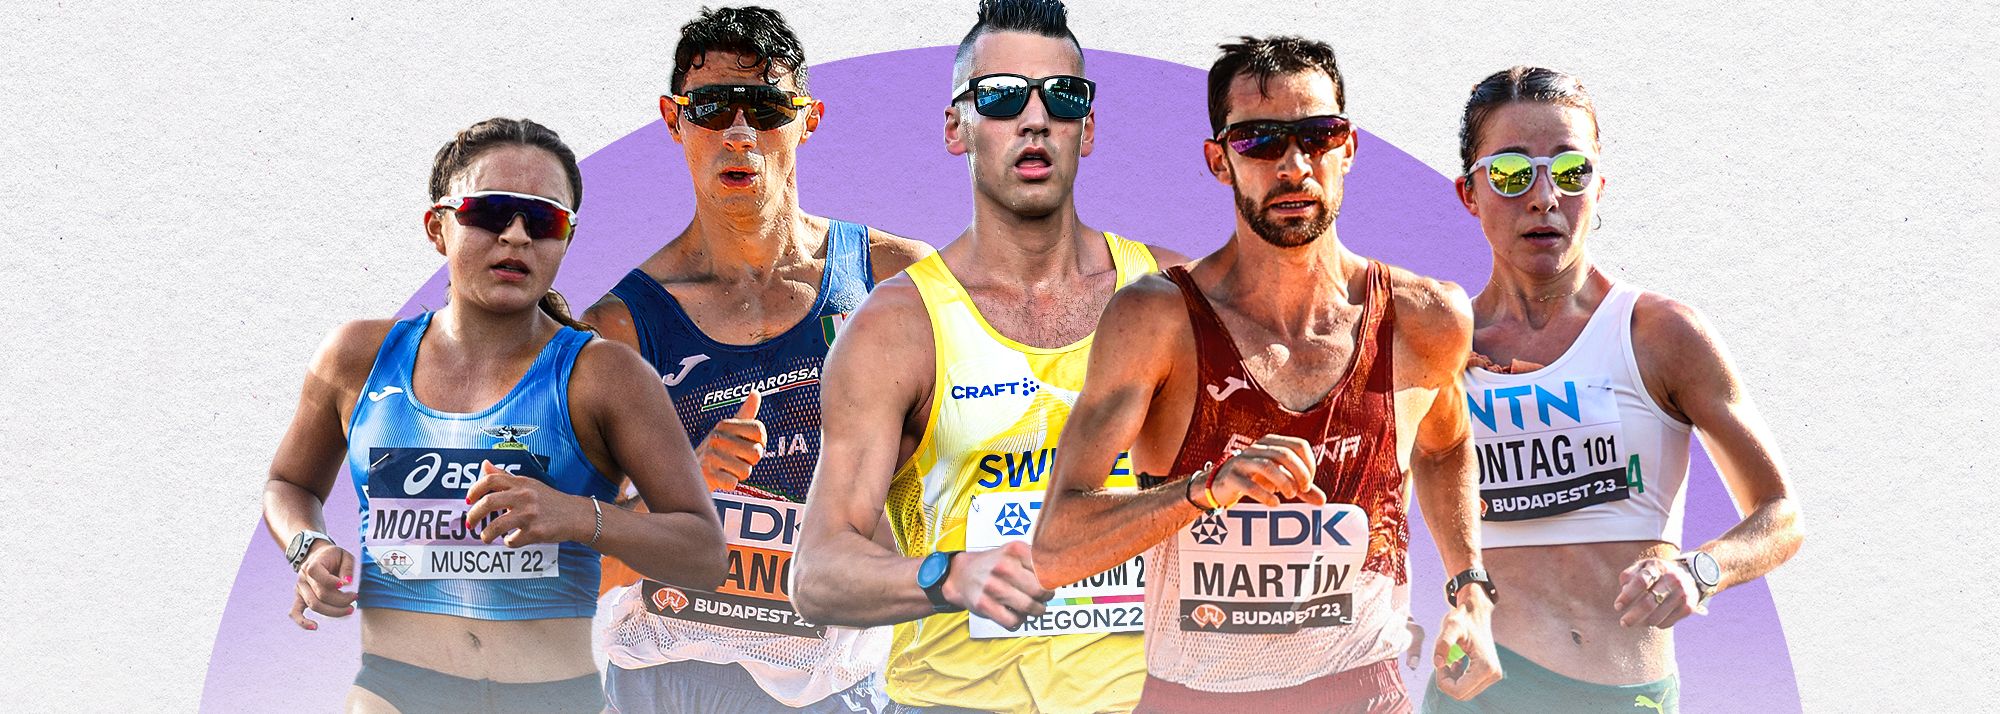 The World Athletics Race Walking Team Championships Antalya 24 will be streamed live in a number of territories on World Athletics Inside Track, as well as via broadcasters around the world